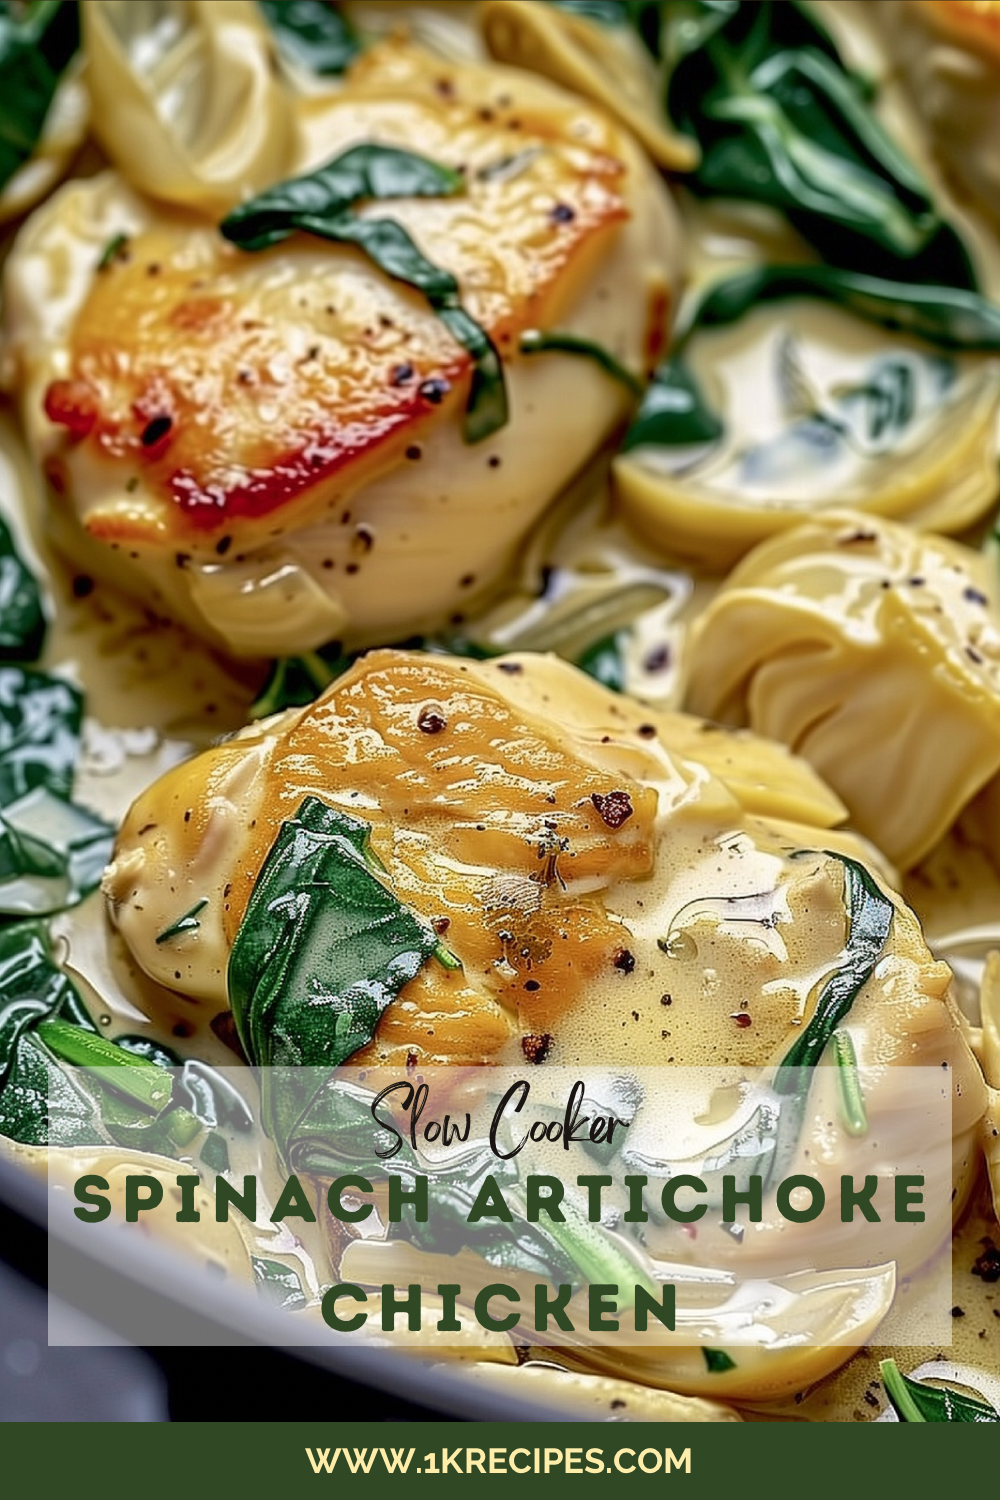 Don’t forget to pin this Spinach Artichoke Chicken recipe to your favorite food board